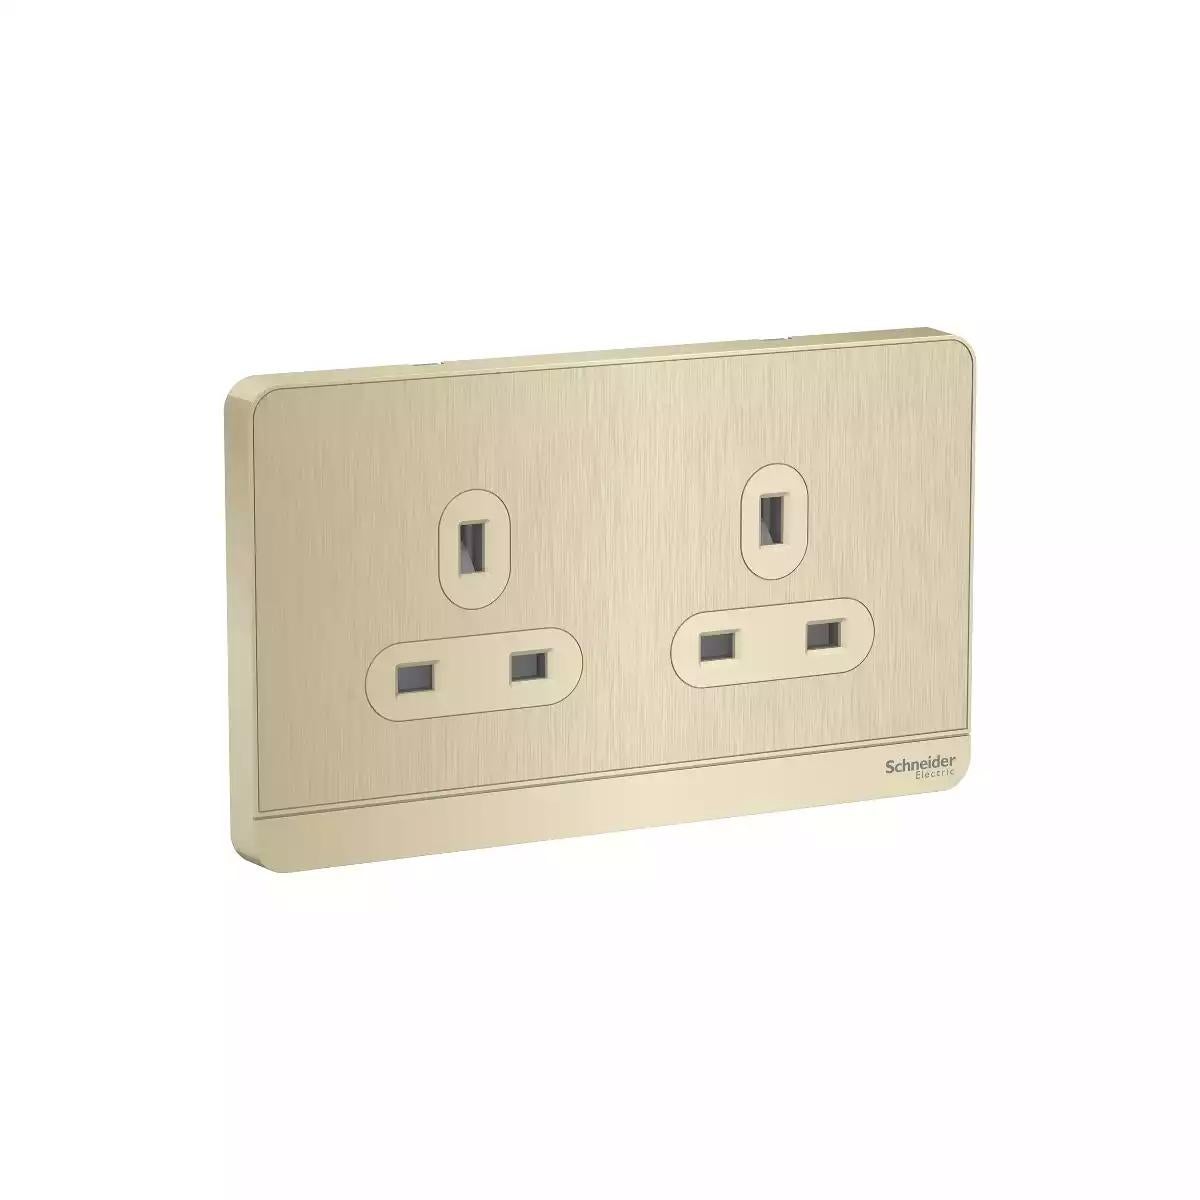 AvatarOn, 2 switched socket, 3P, 13 A, 250 V, LED, Metal Gold Hairline